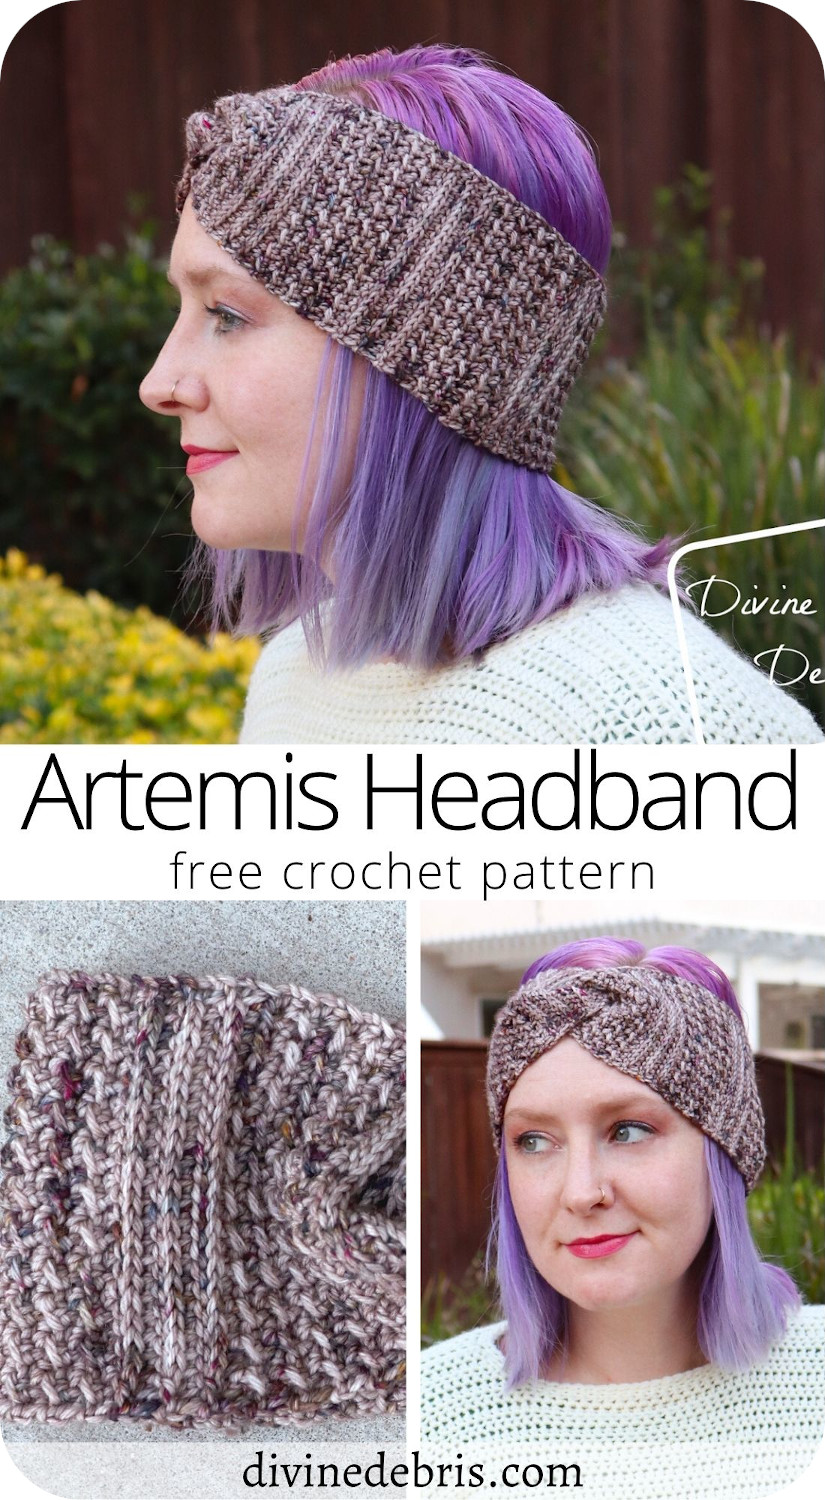 Stand out with this bold the Artemis Headband crochet pattern by DivineDebris.com. Stay on trend with a fun headband but don't look like everyone else.